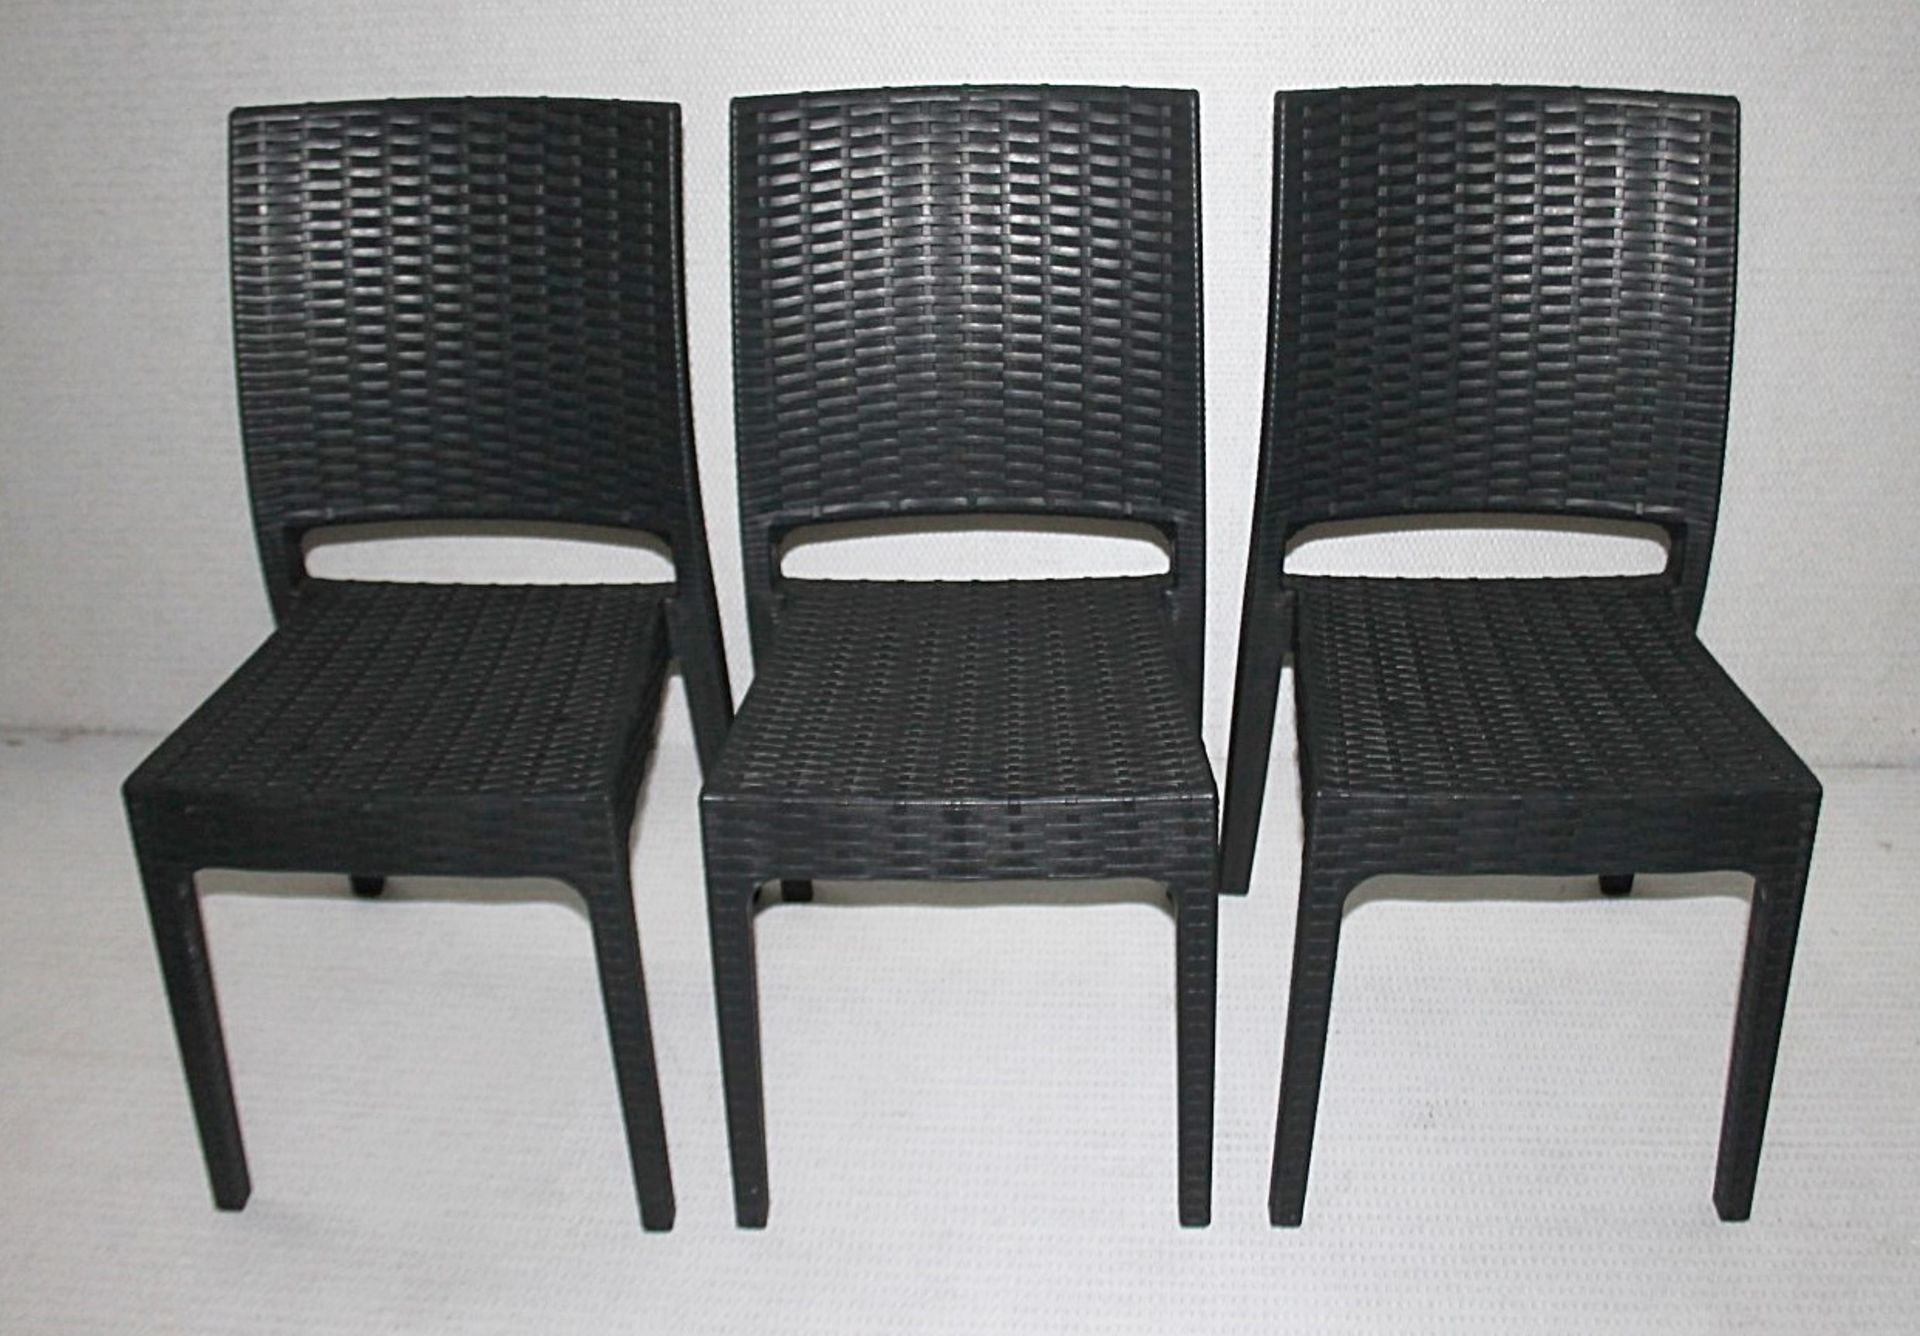 4 x SIESTA EXCLUSIVE 'Florida' Commercial Stackable Rattan-style Chairs In Dark Grey - RRP £320.00 - Image 12 of 13